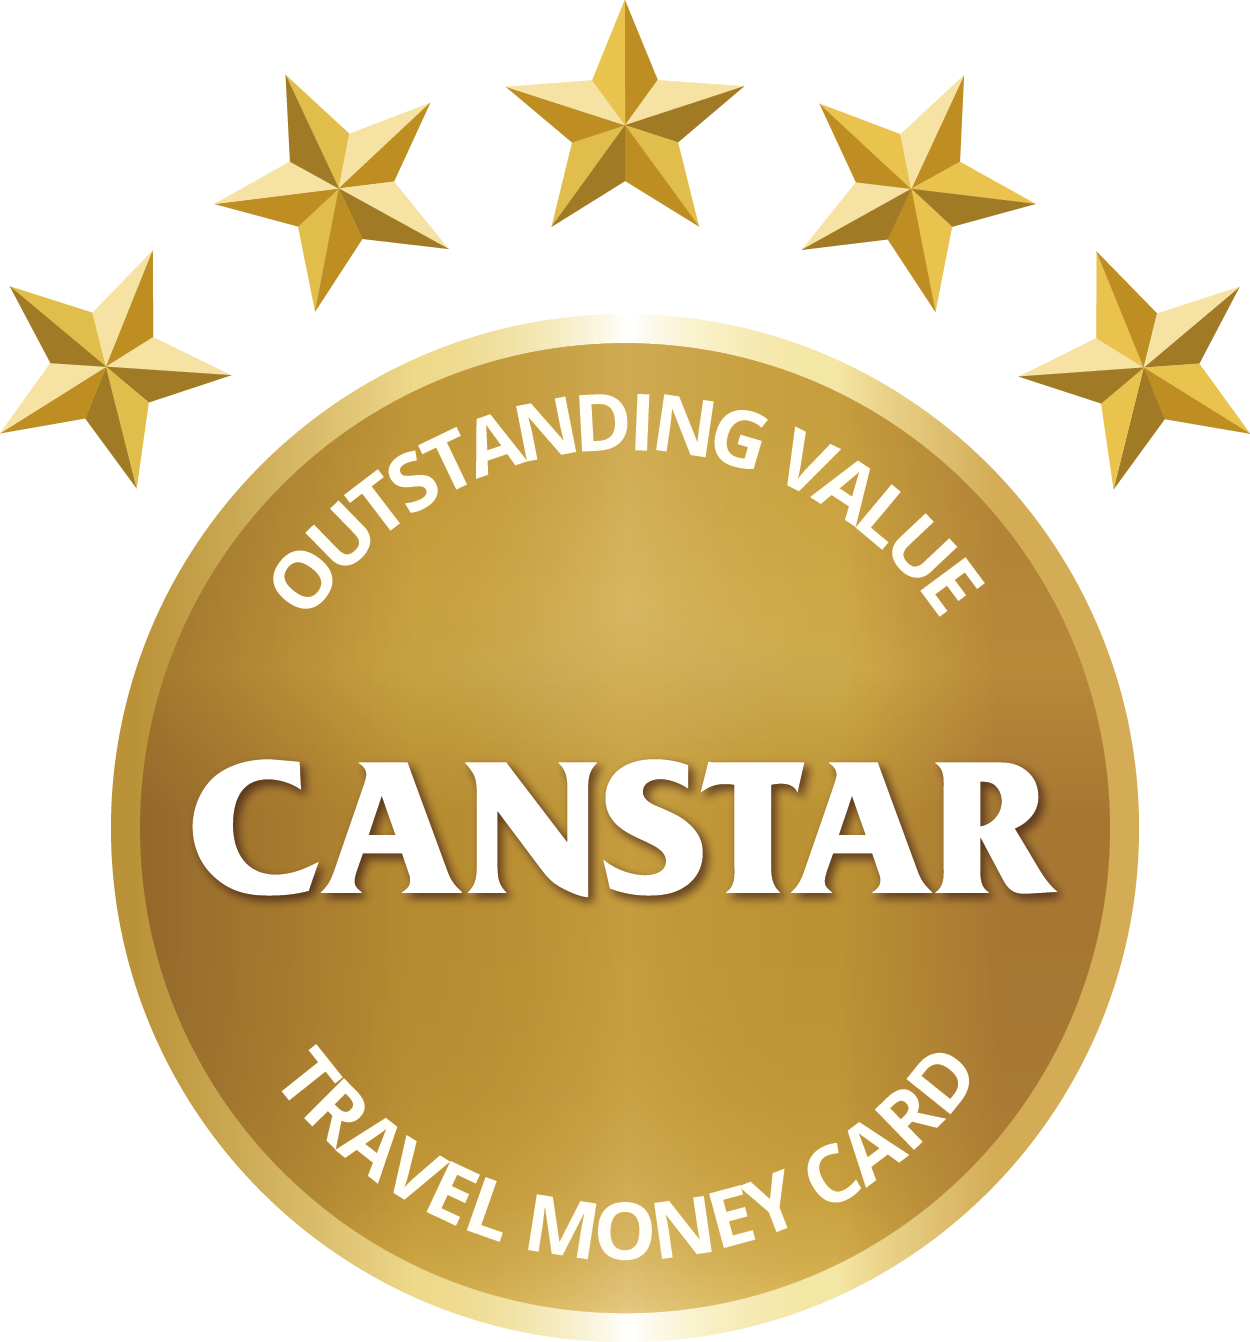 Canstar Outstanding Value – Travel Money Card Star Ratings Report 2016